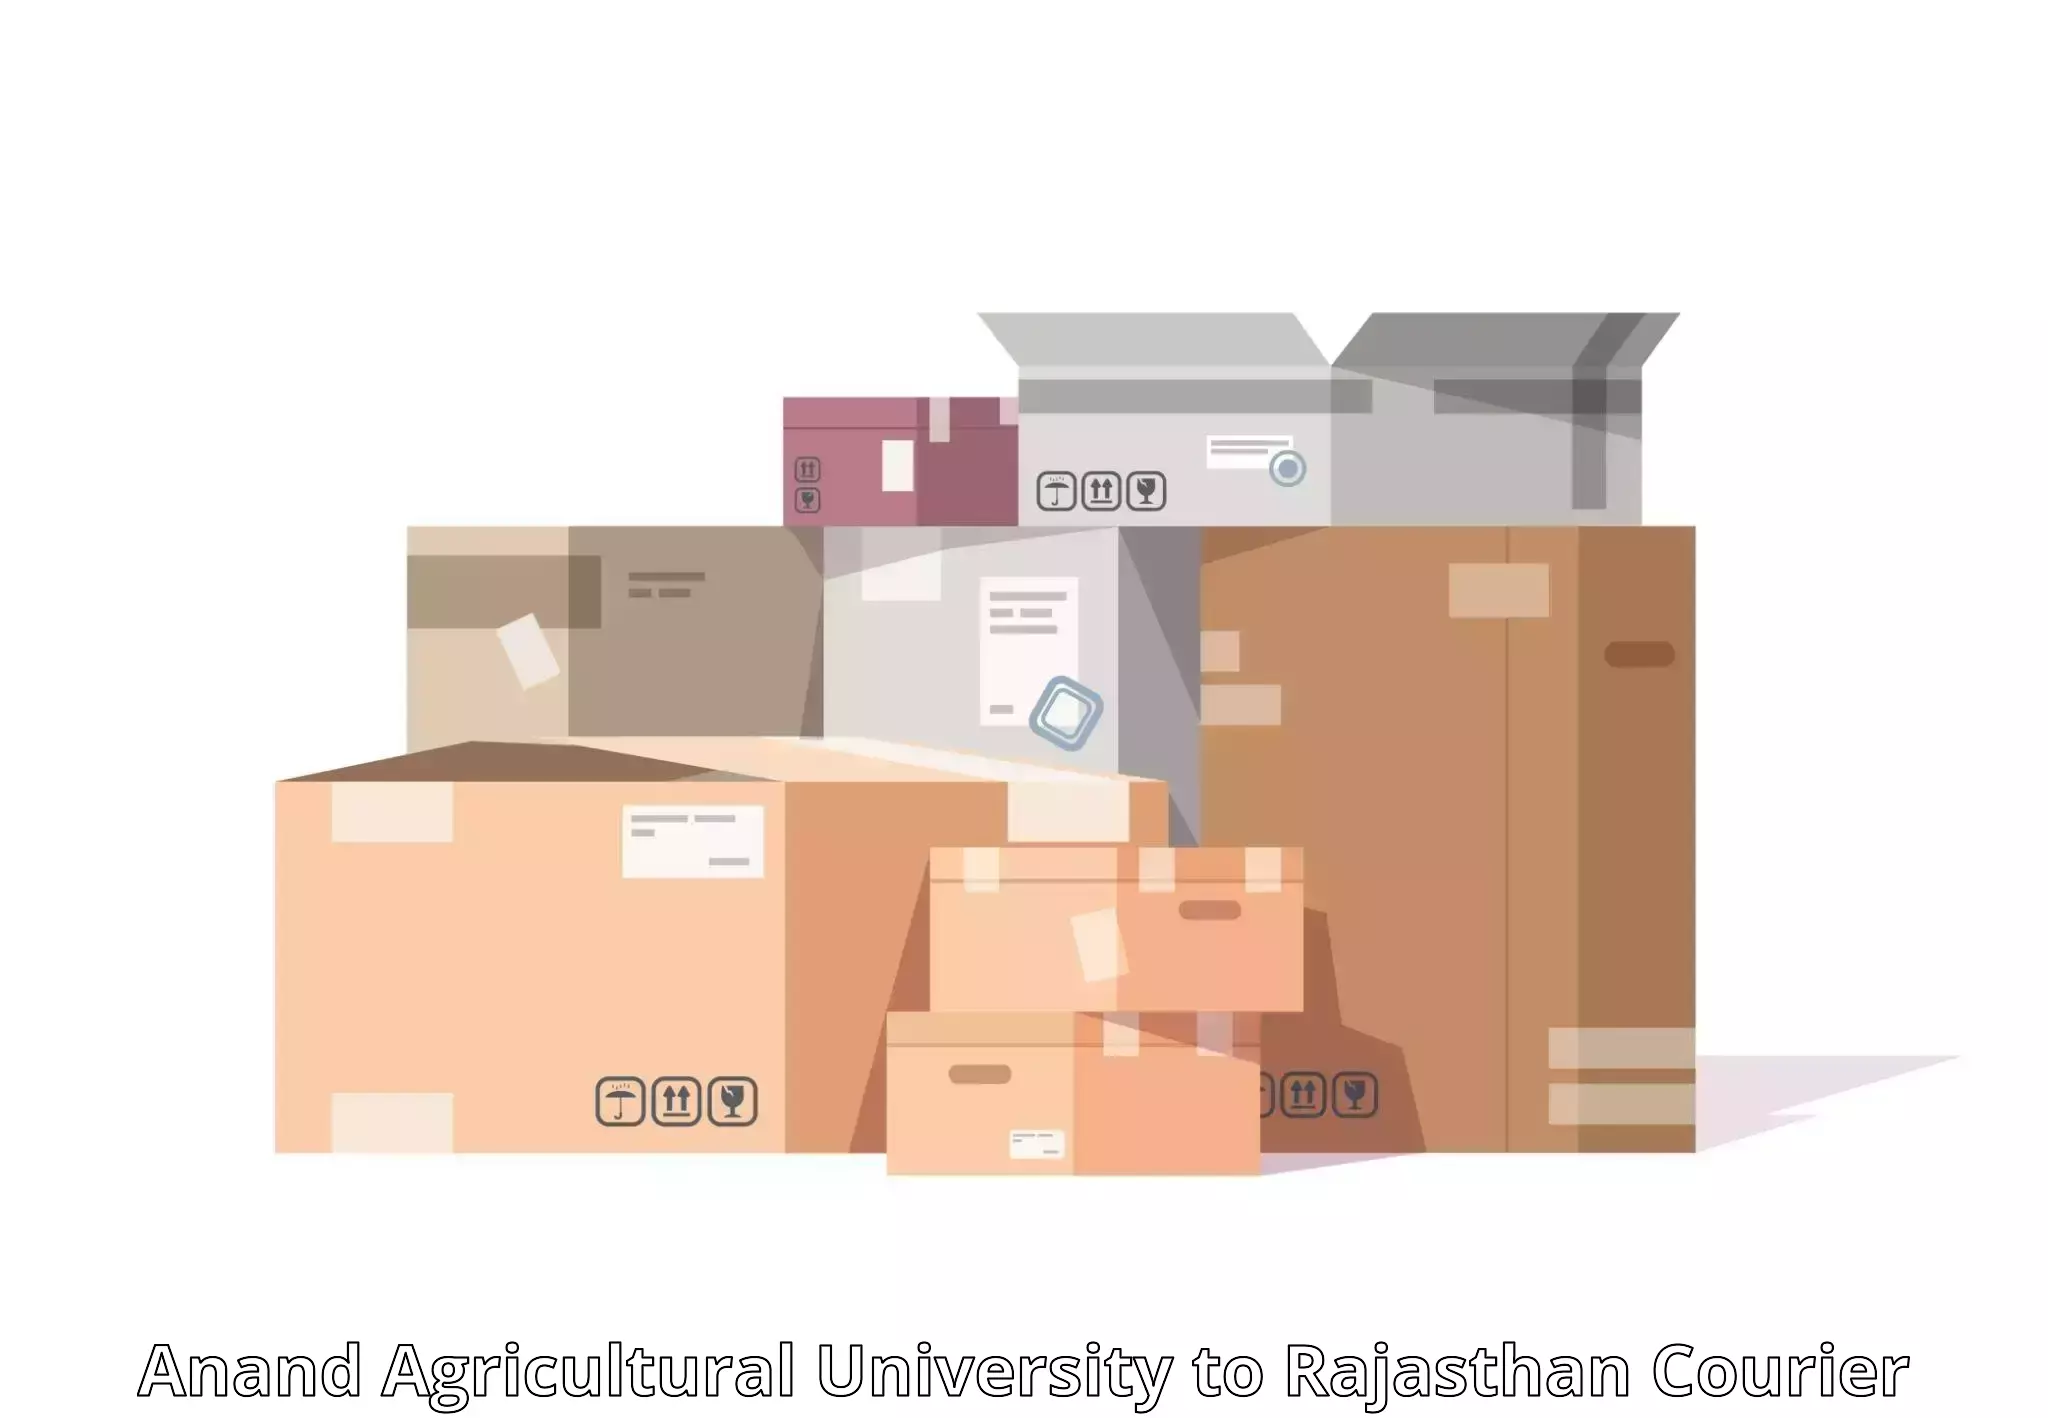 Affordable parcel rates Anand Agricultural University to Nohar